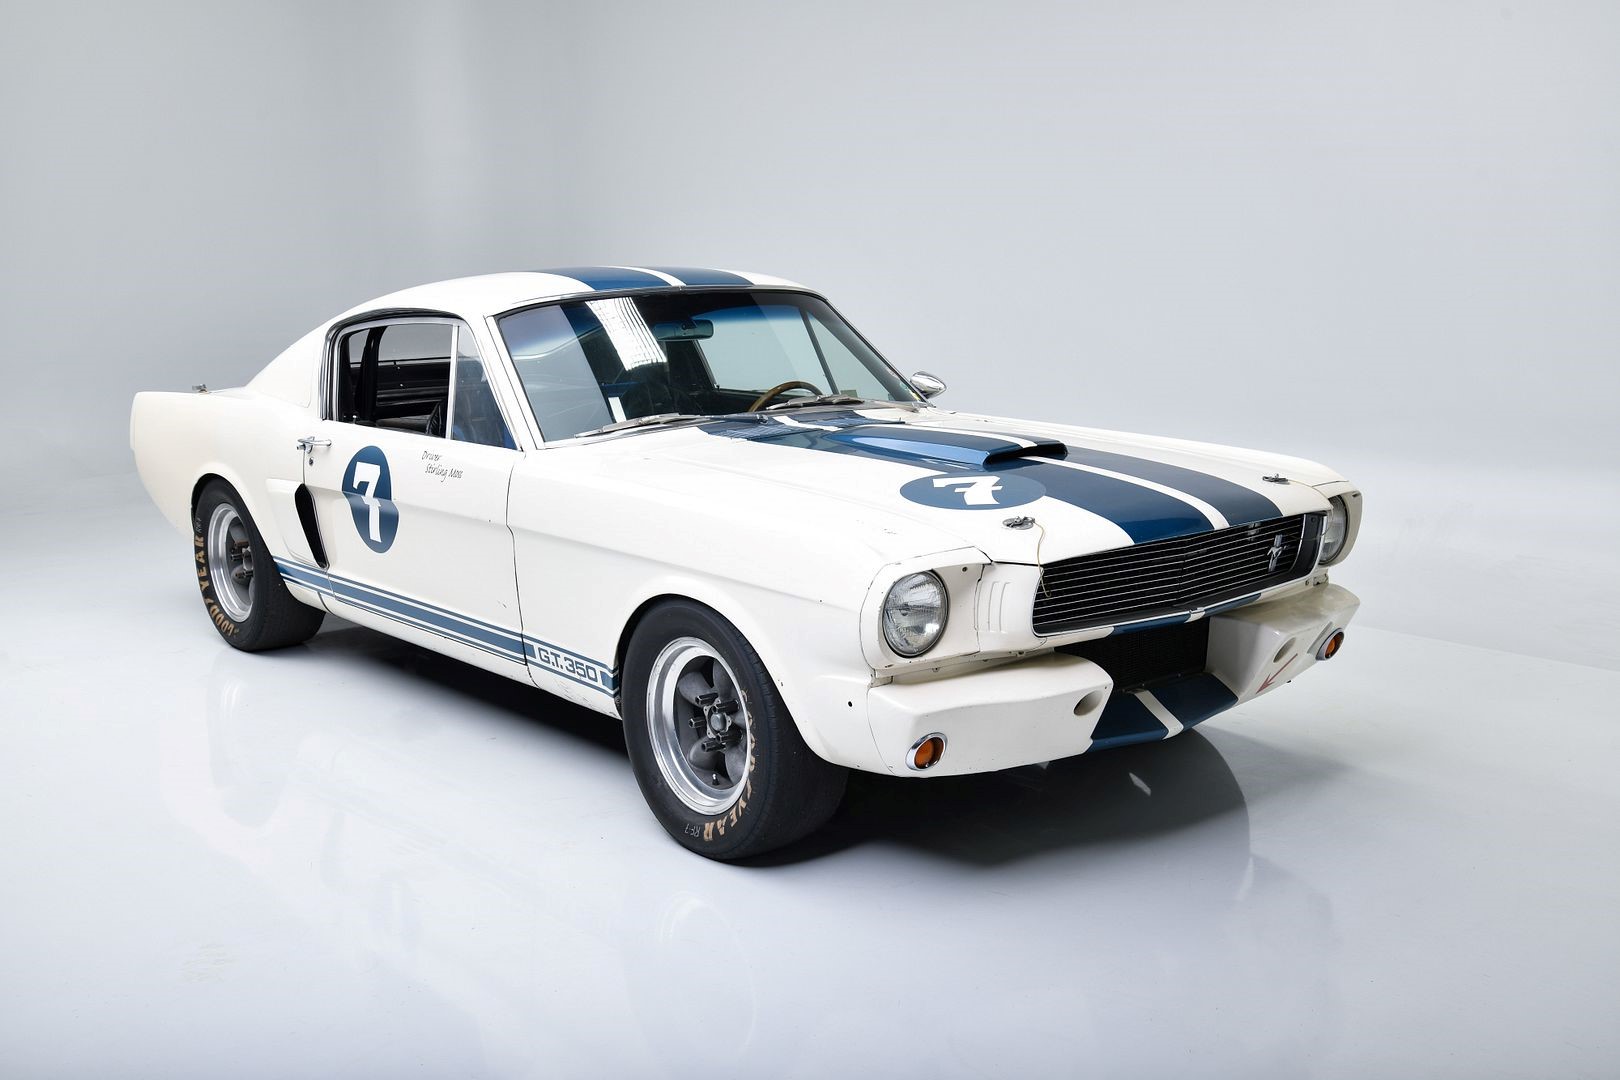 1966 Ford Mustang Shelby GT350 owned and raced by Stirling Moss